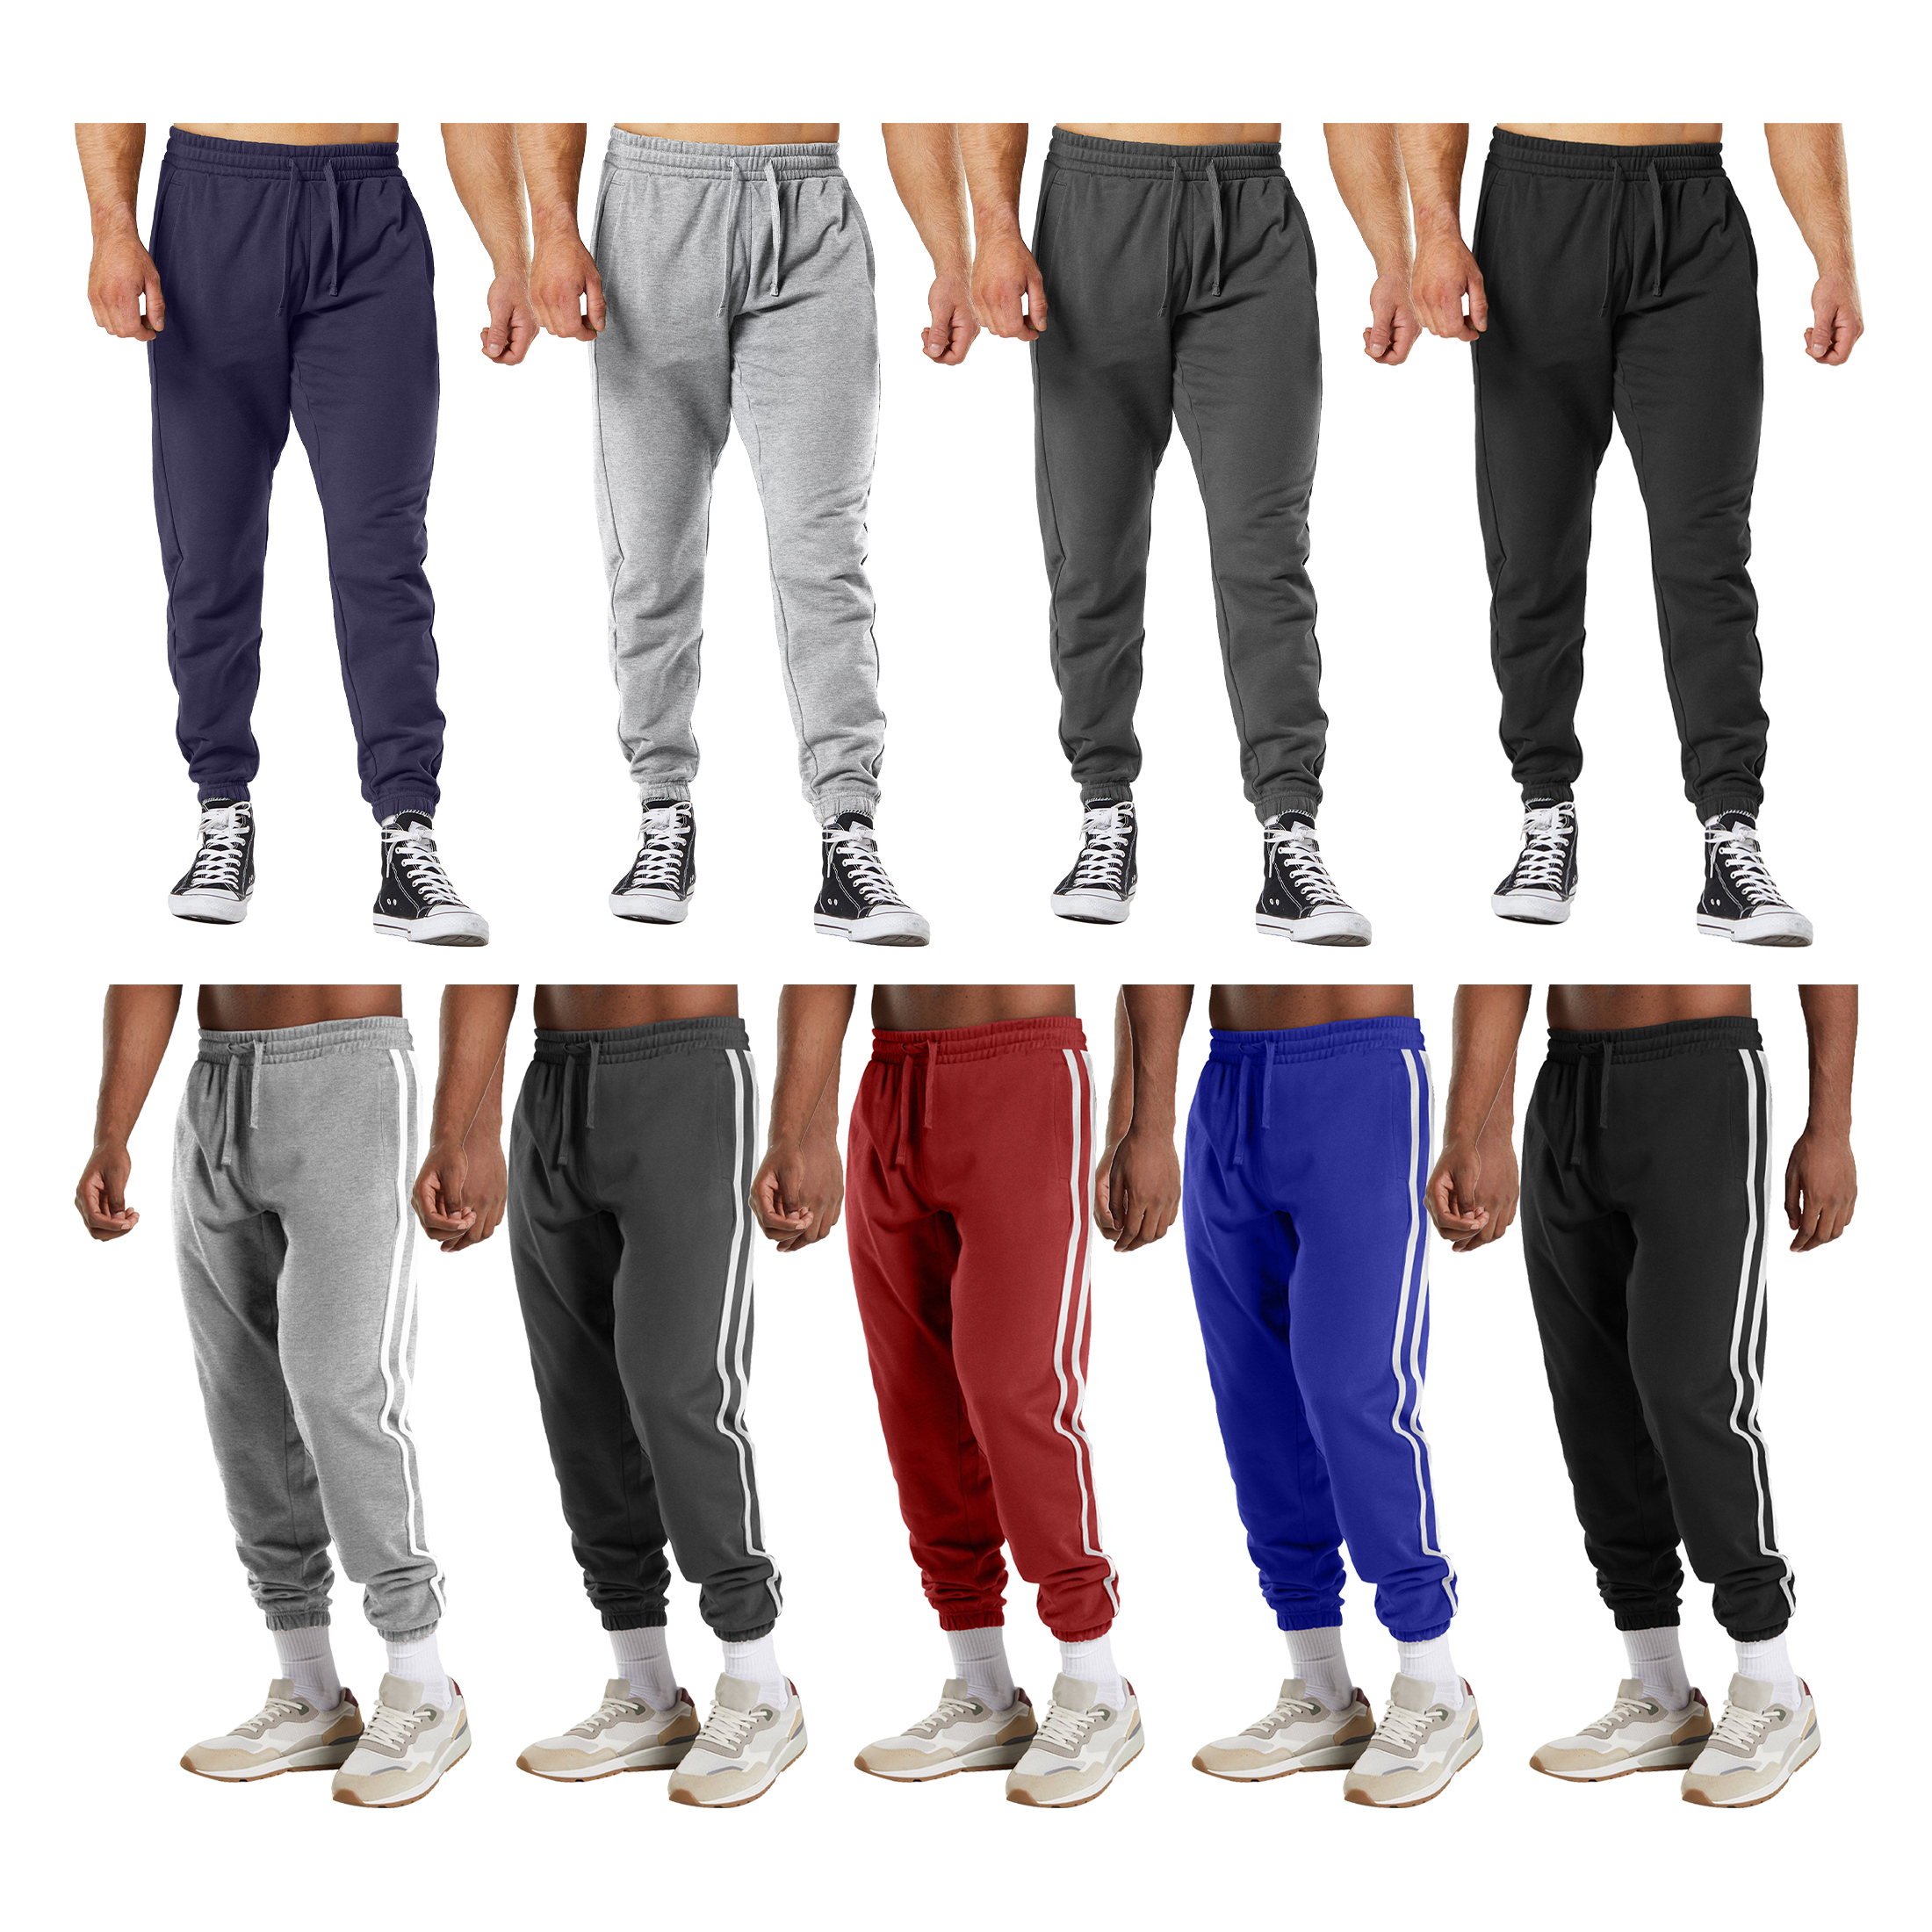 Multi-Pack: Men's Casual Fleece-Lined Elastic Bottom Jogger Pants With Pockets - 3-PACK, M